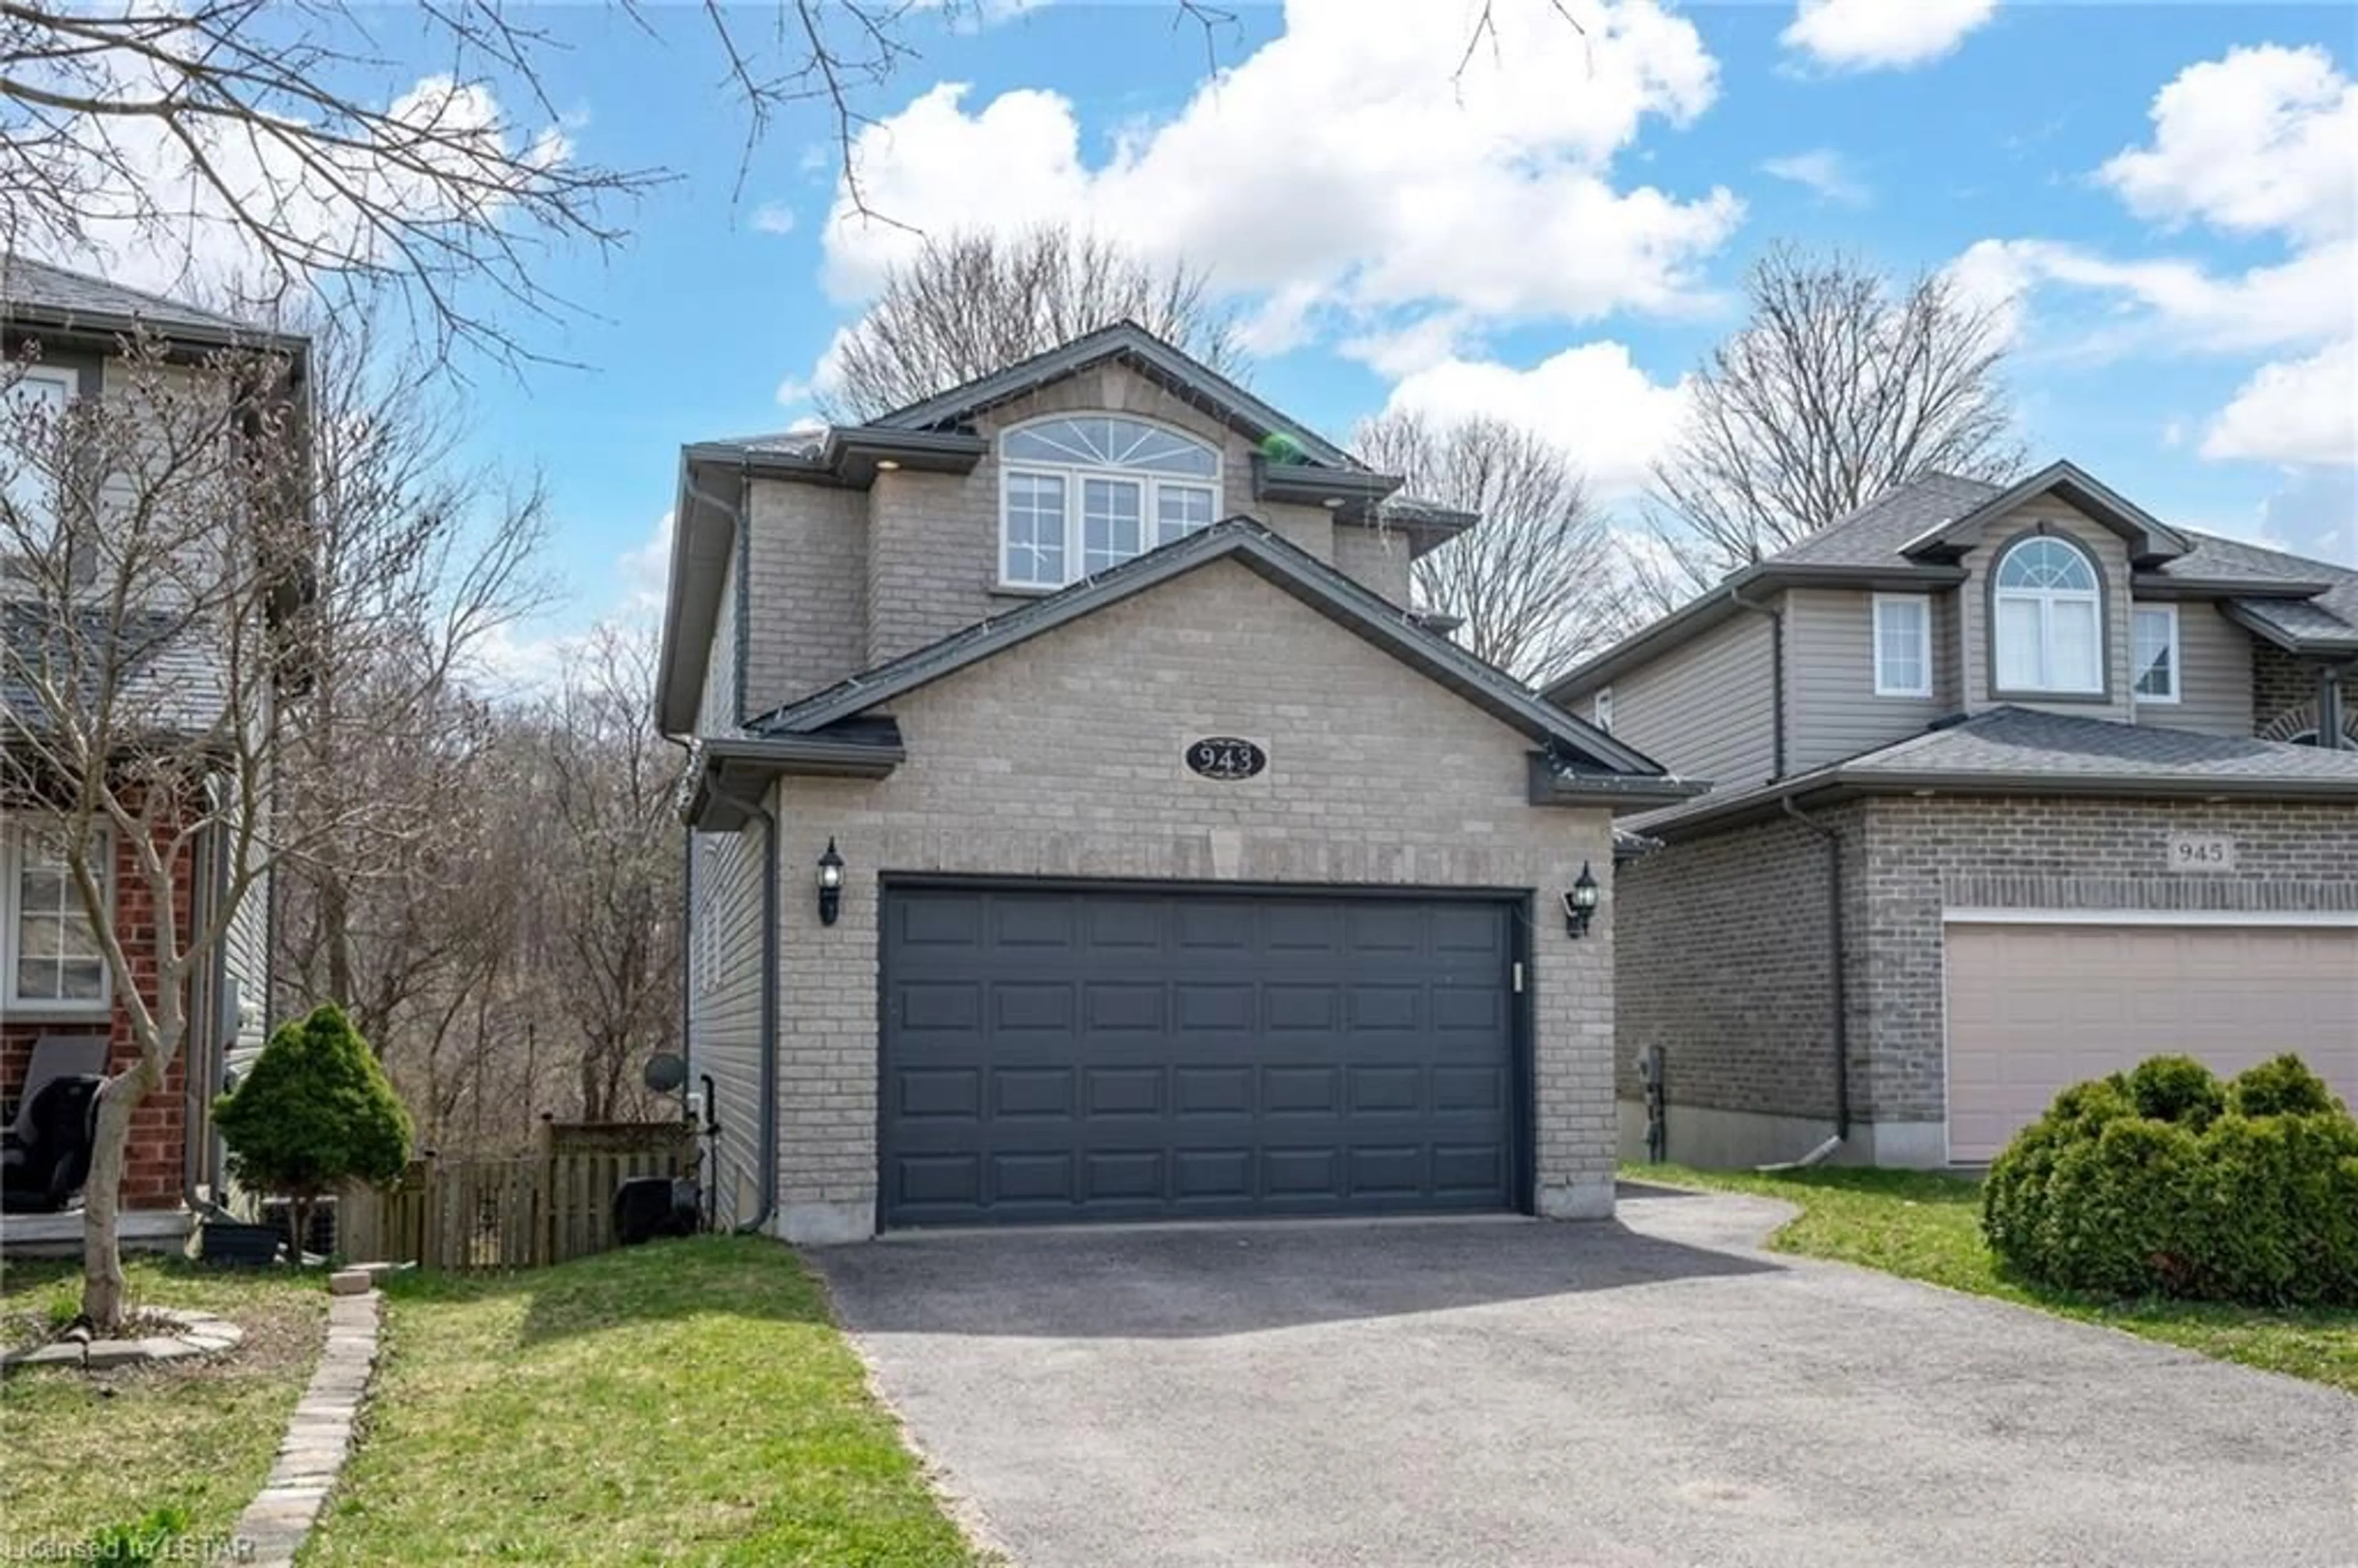 Frontside or backside of a home for 943 Blythwood Rd, London Ontario N6H 5W1